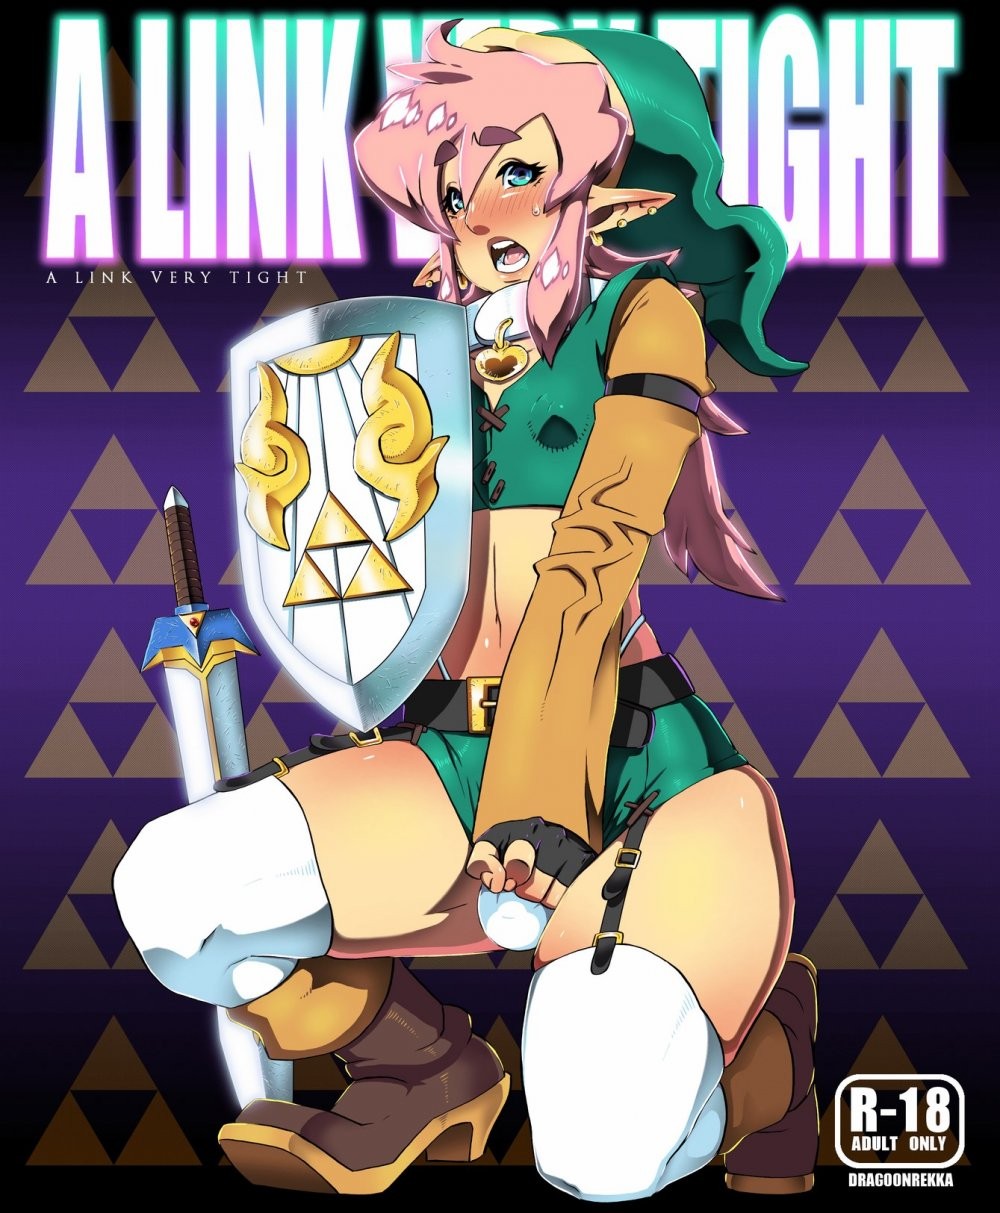 A LINK VERY TIGHT